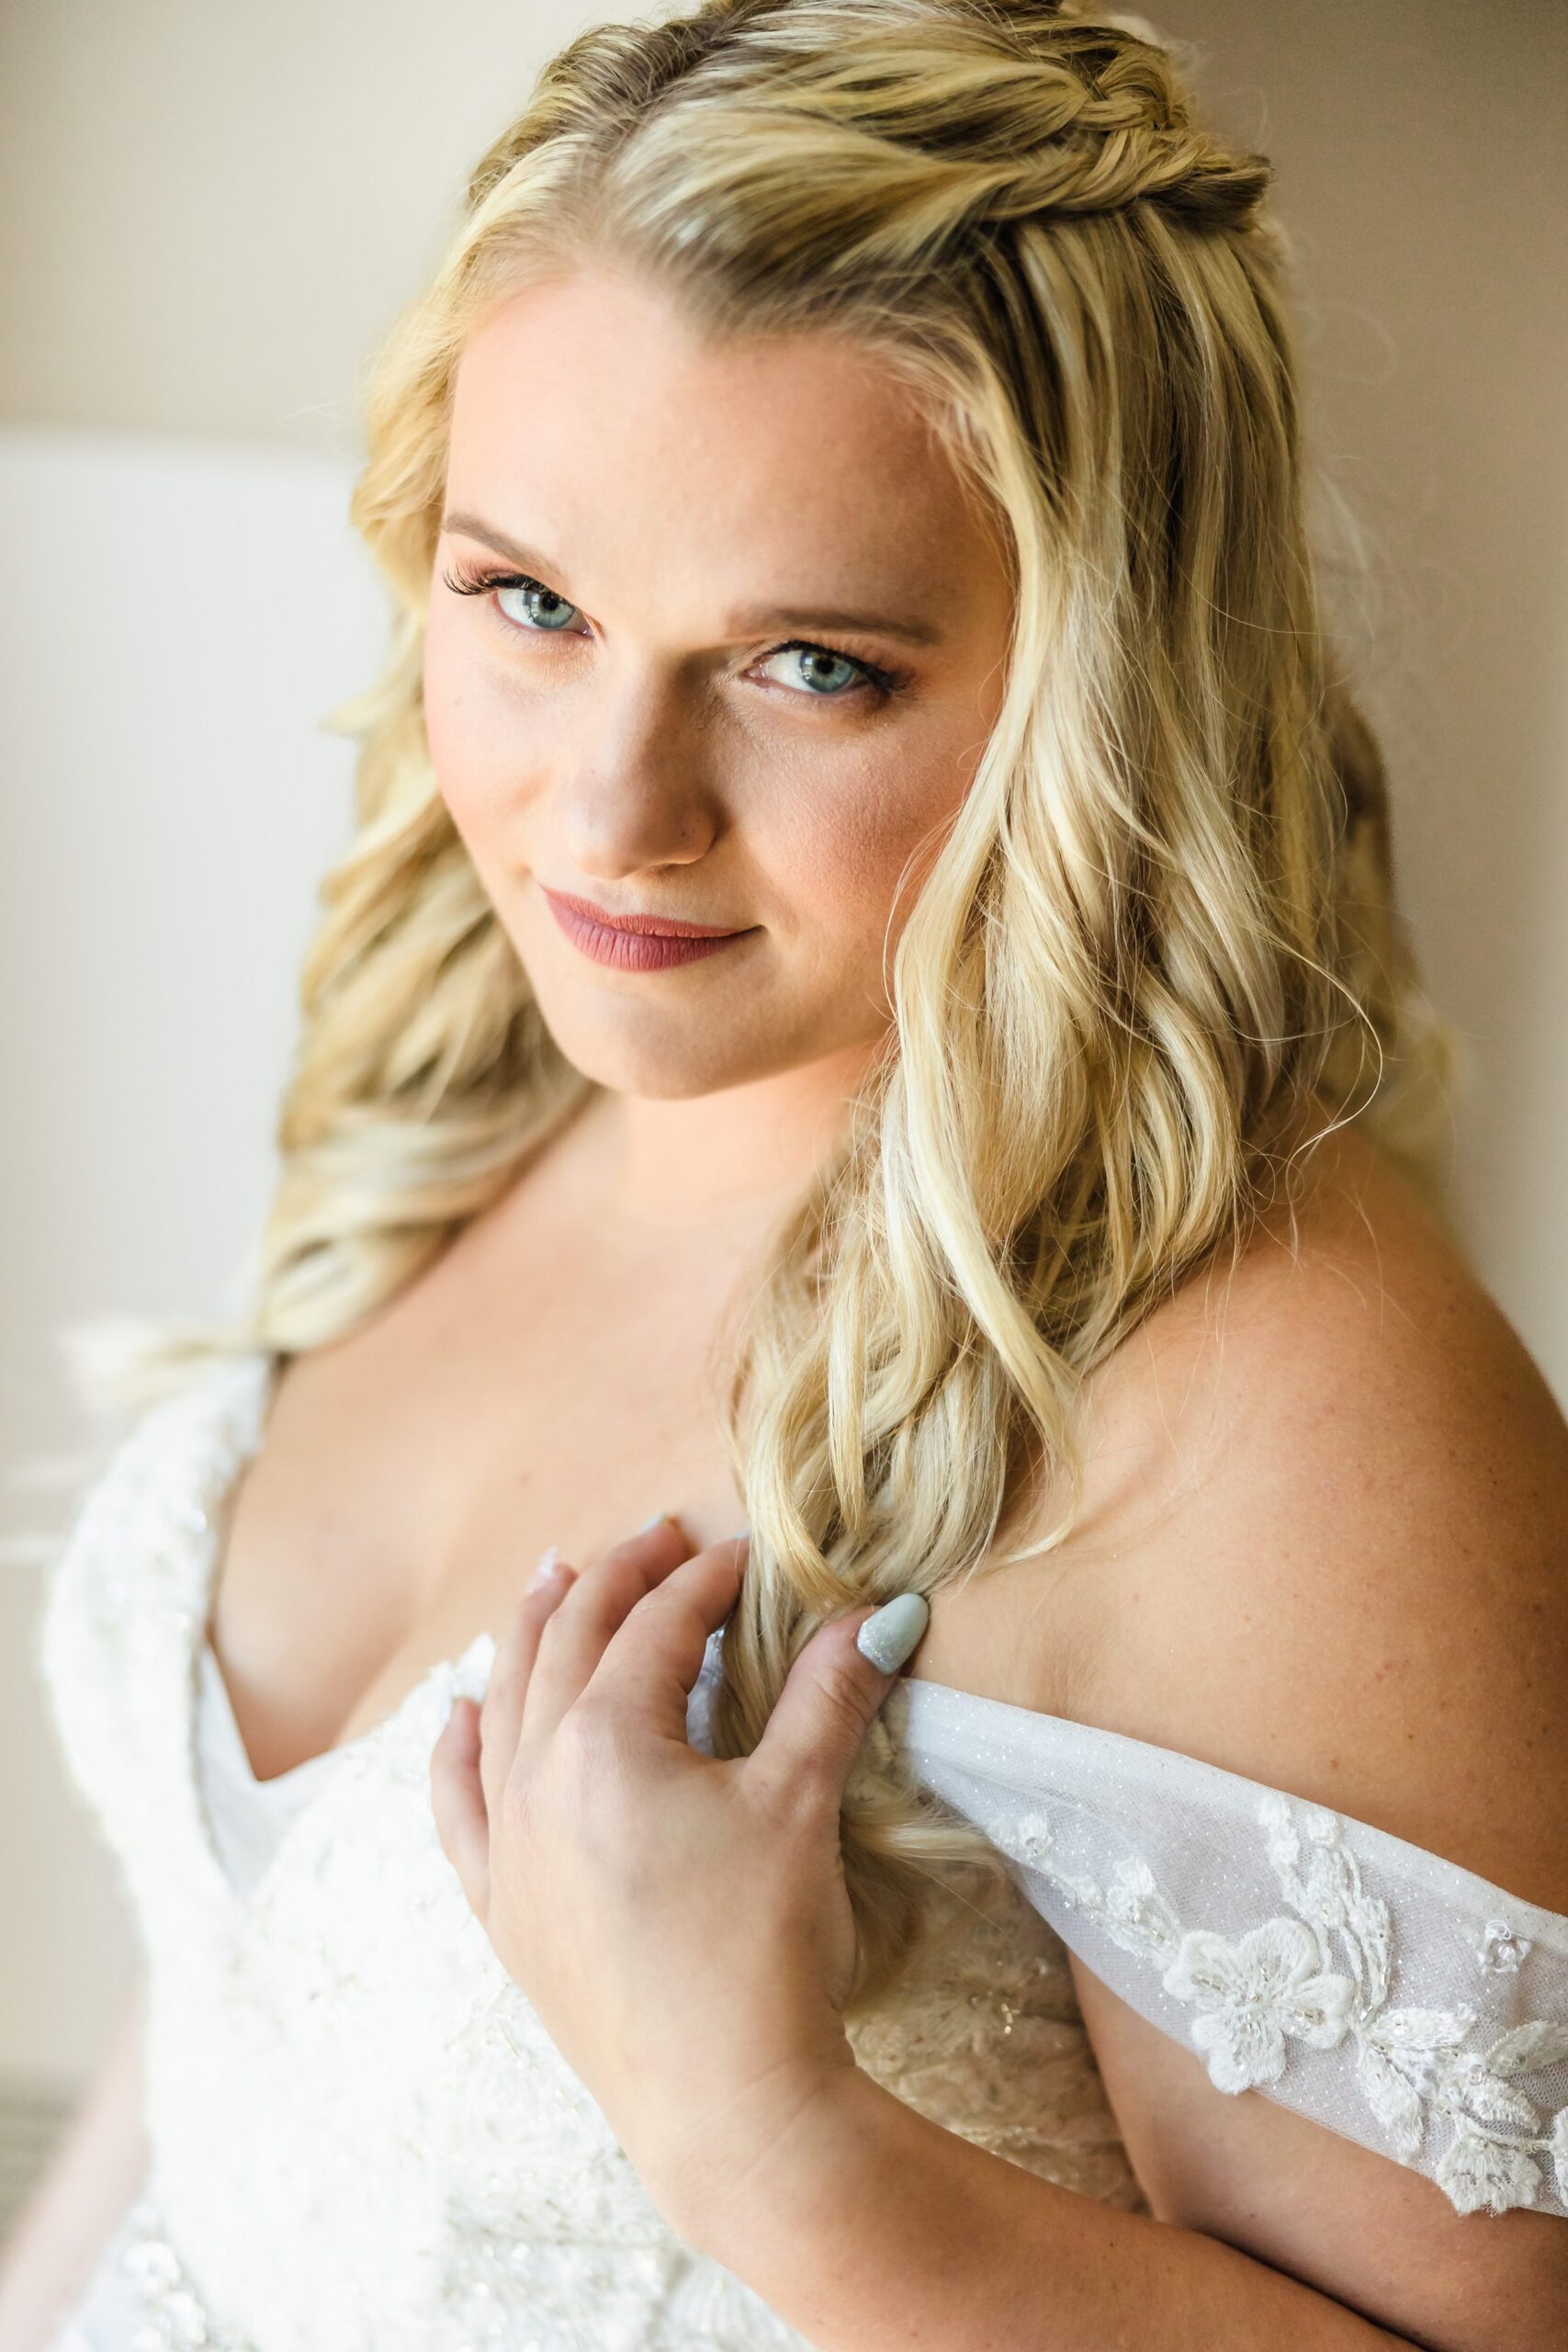 Bridal Portrait during a wedding at the Destihl Brewery in Normal, Illinois.